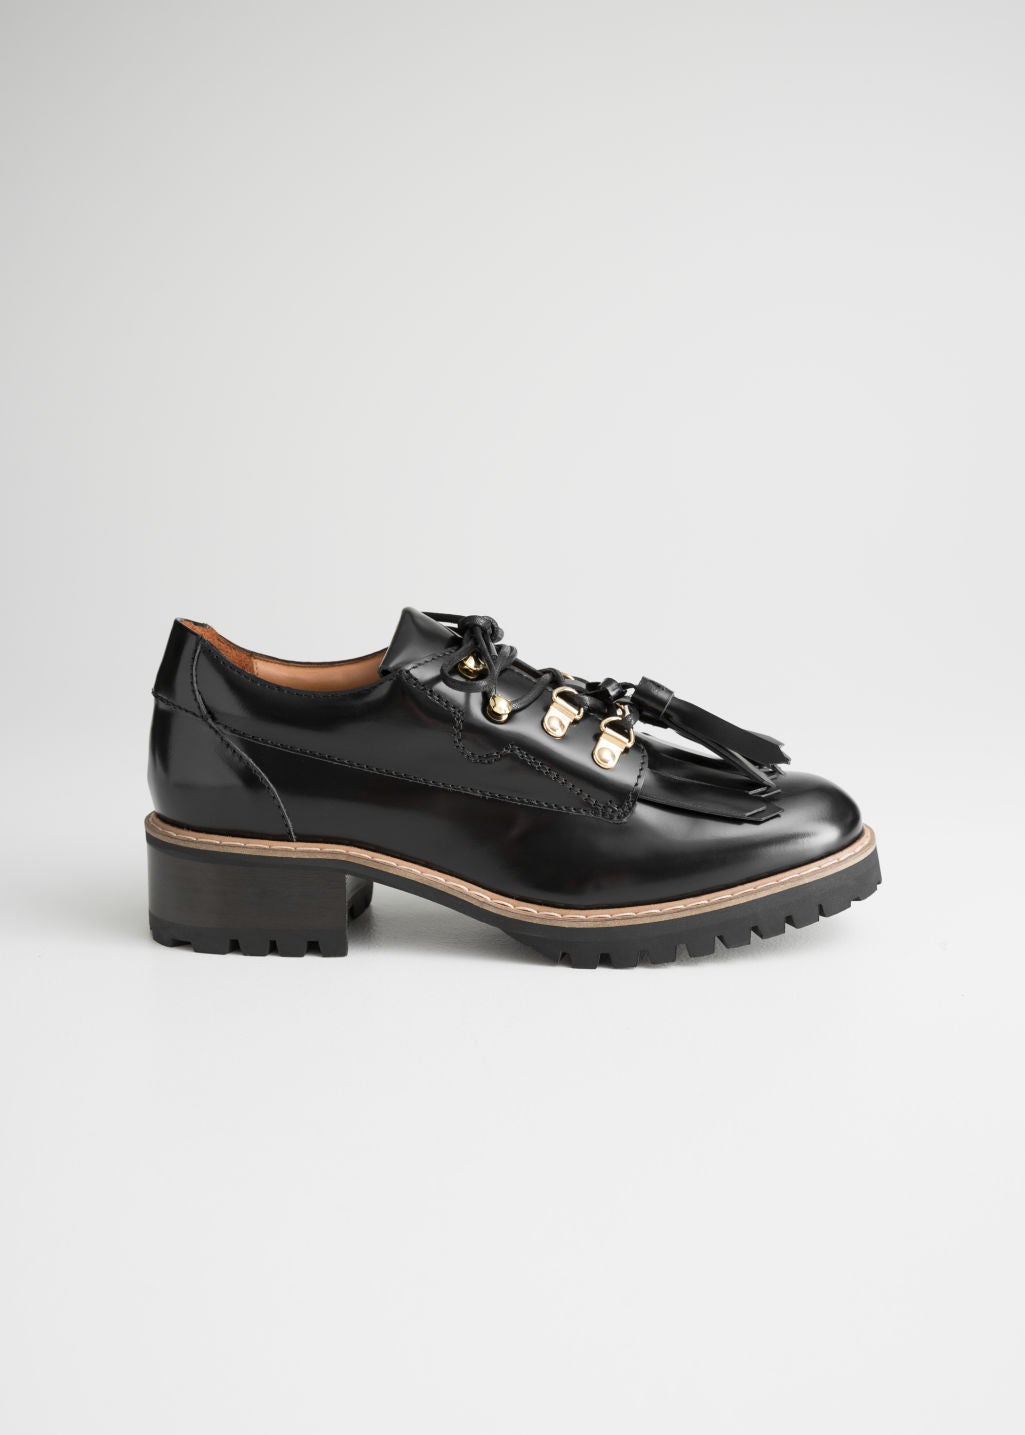 & Other Stories + Tassel Lace Up Oxfords